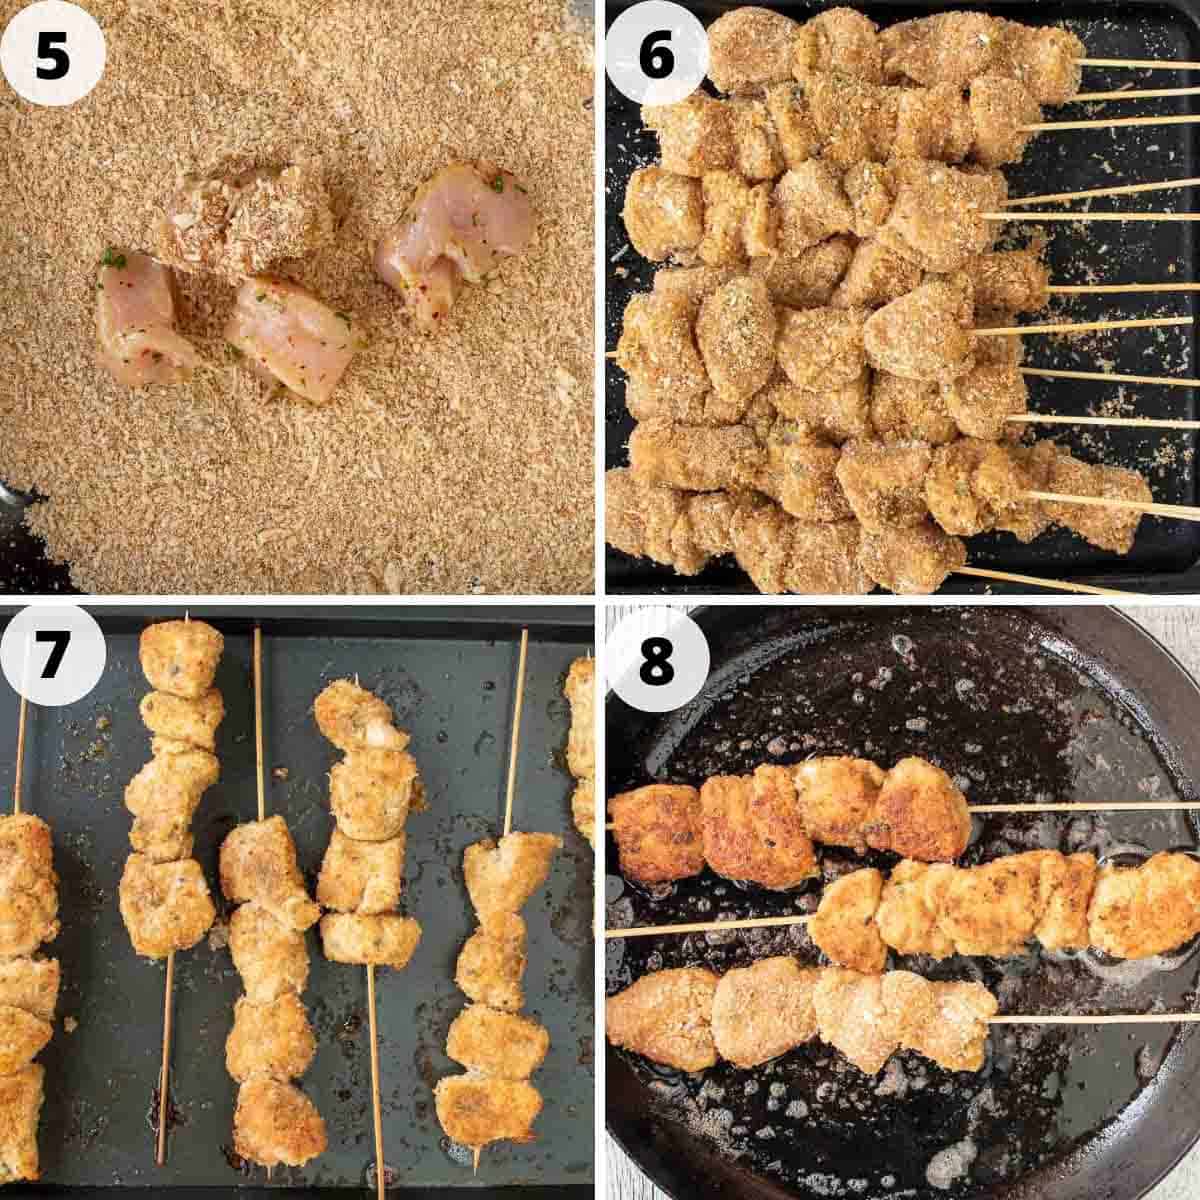 Four step process showing how to bread and cook these chicken skewers.